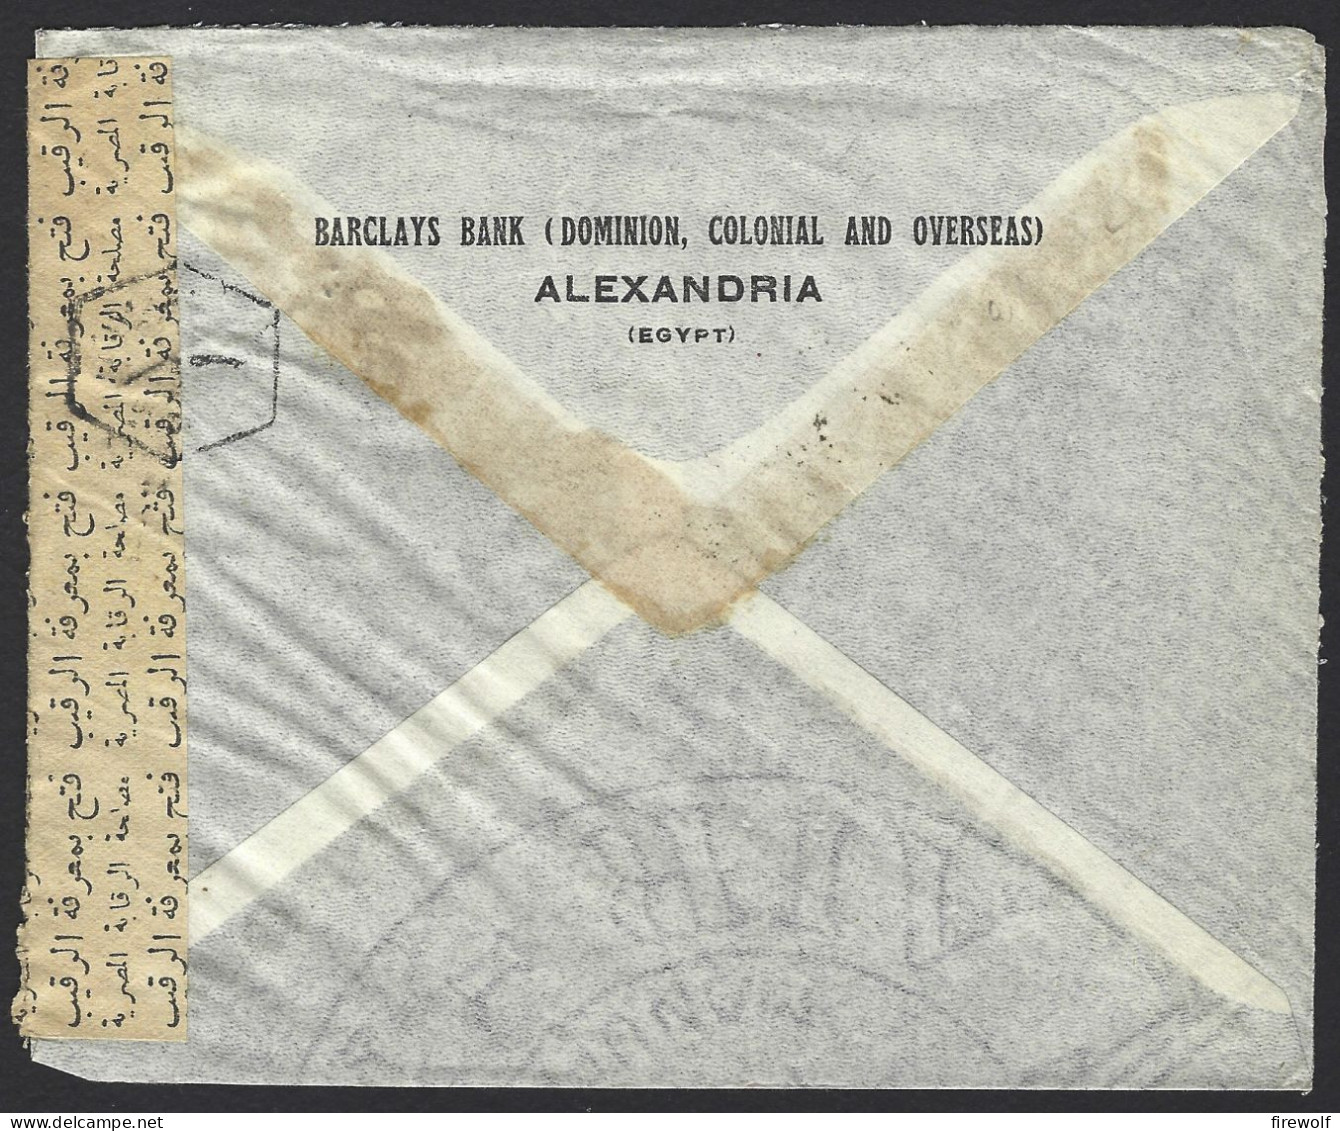 F10 - Egypt 1949 Commercial Cover Barclays Bank -  Alexandria To Brussels Belgium - Censor Marks And Seal - Covers & Documents